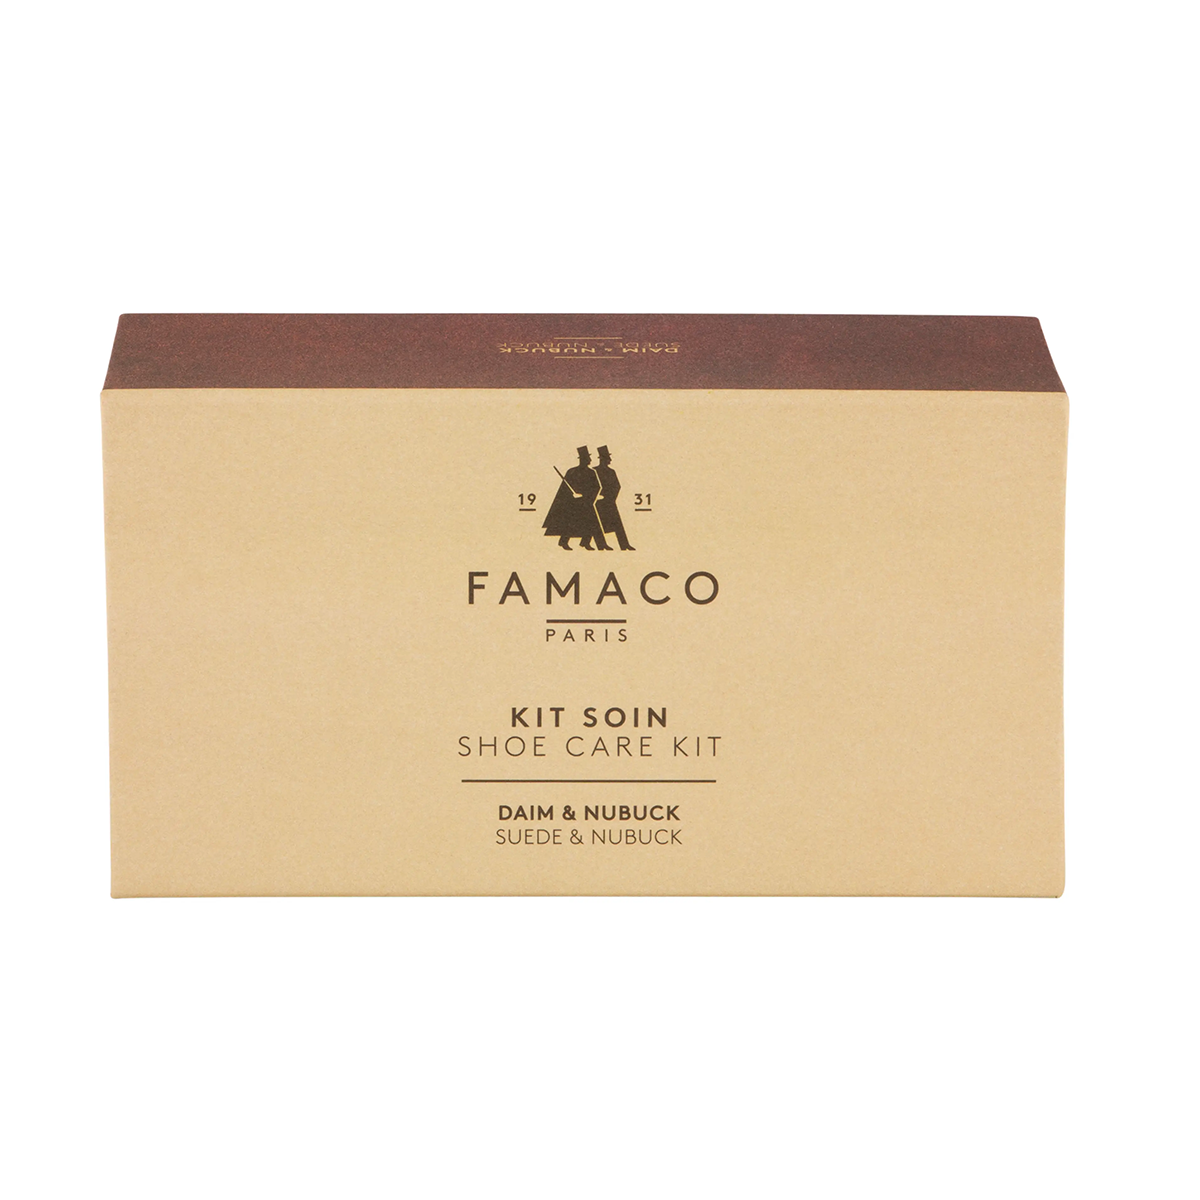 Tasker & Shaw | Luxury Menswear | Suede and nubuck care kit by Famaco